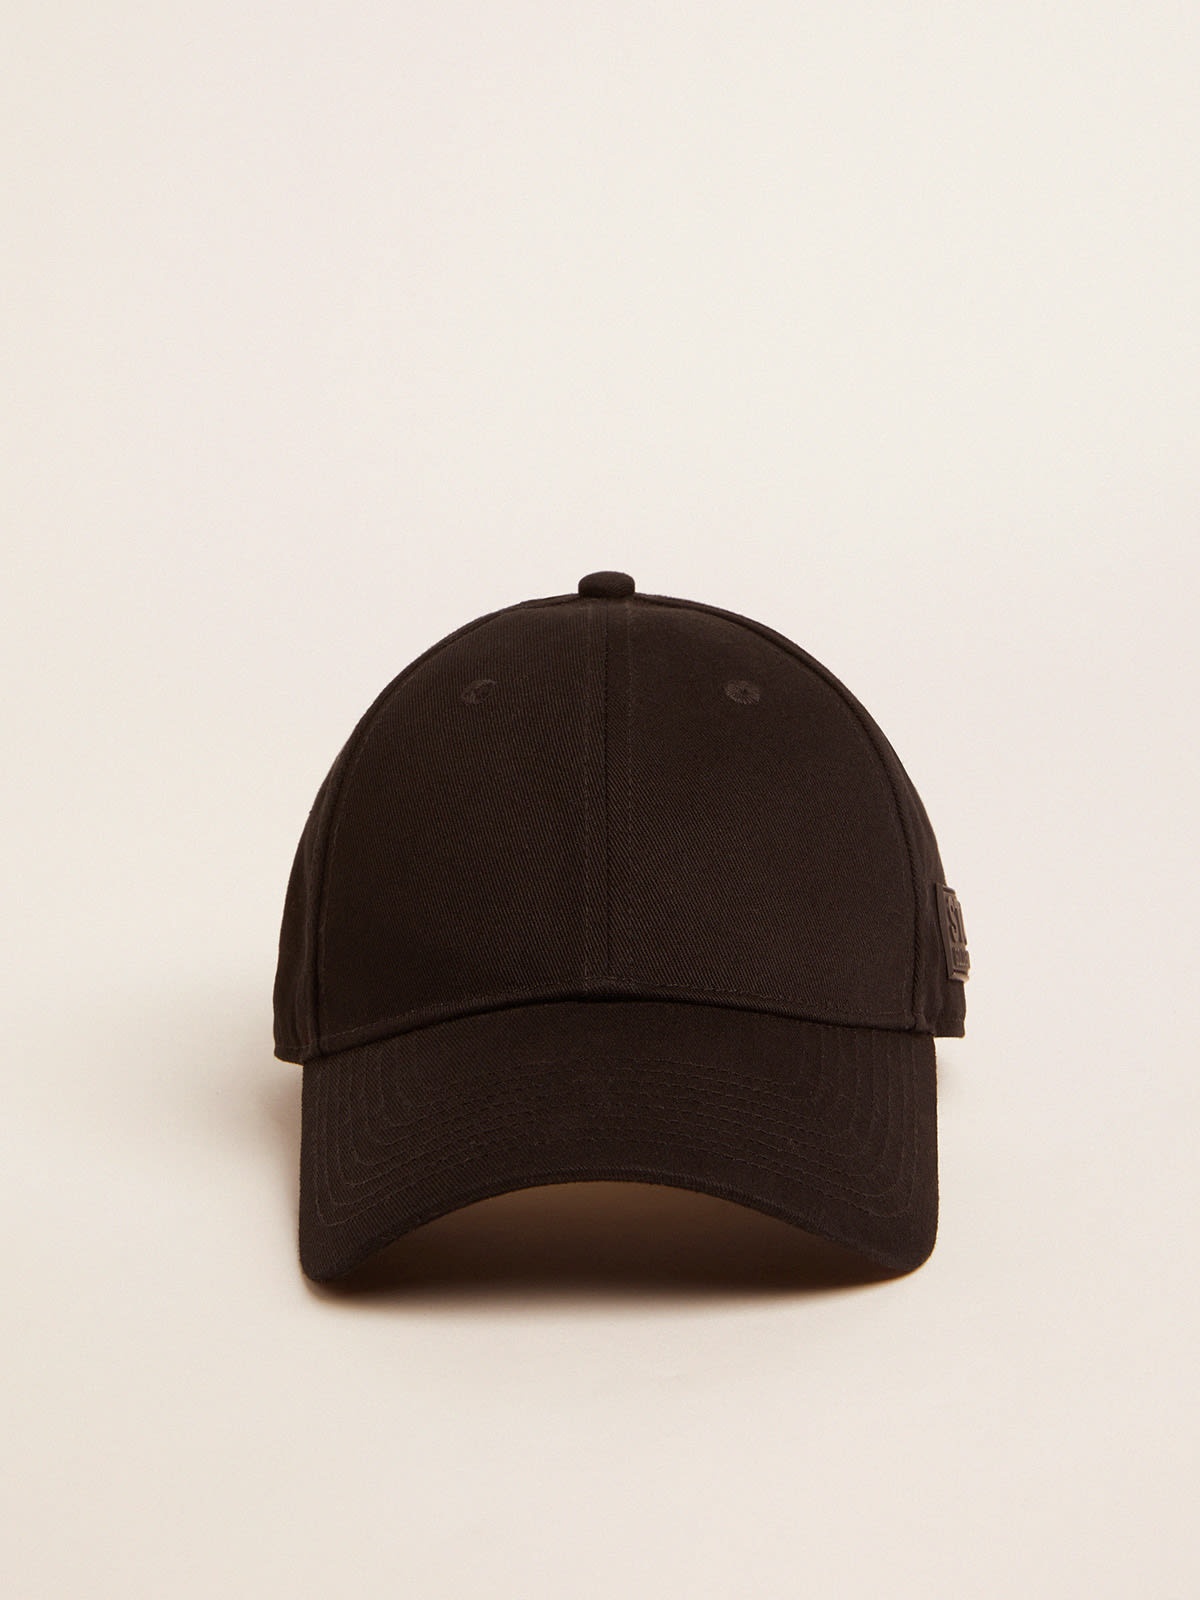 Black baseball cap with logo on the side - 1